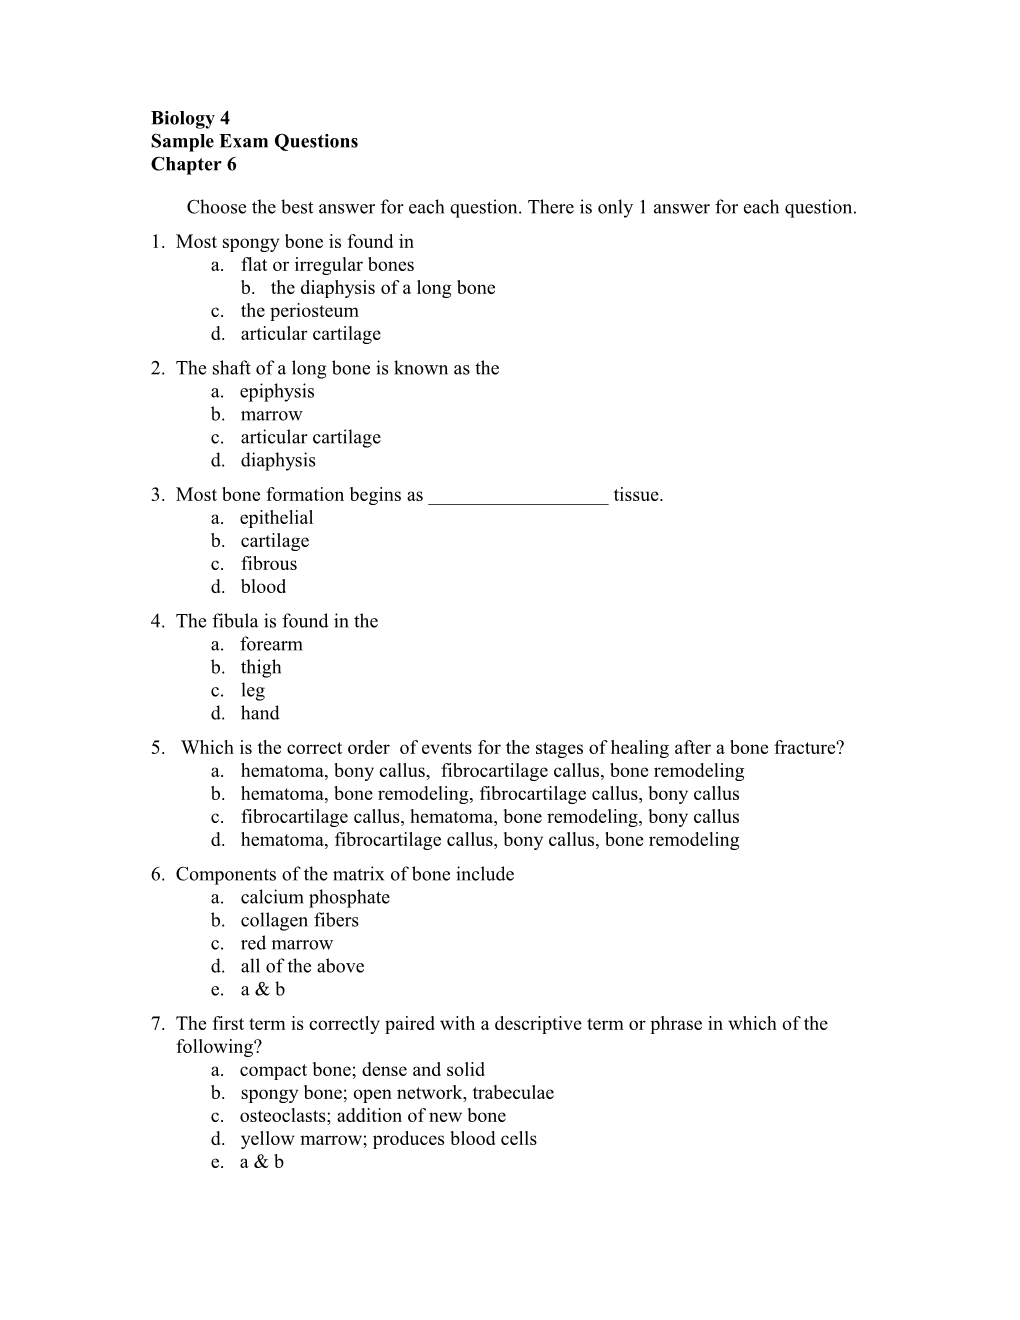 Sample Exam Questions s1